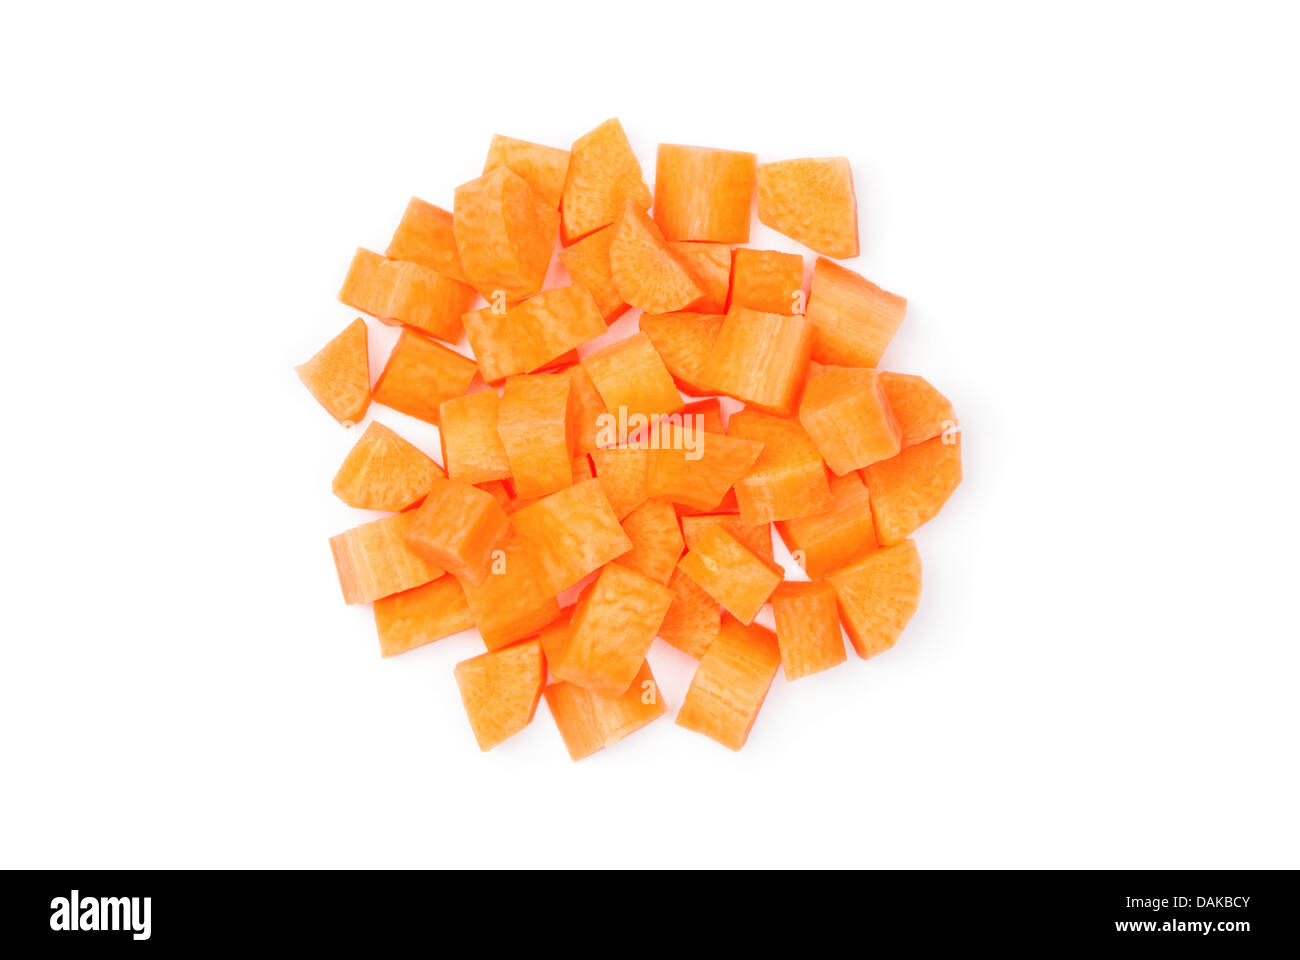 Diced carrot over white background Stock Photo